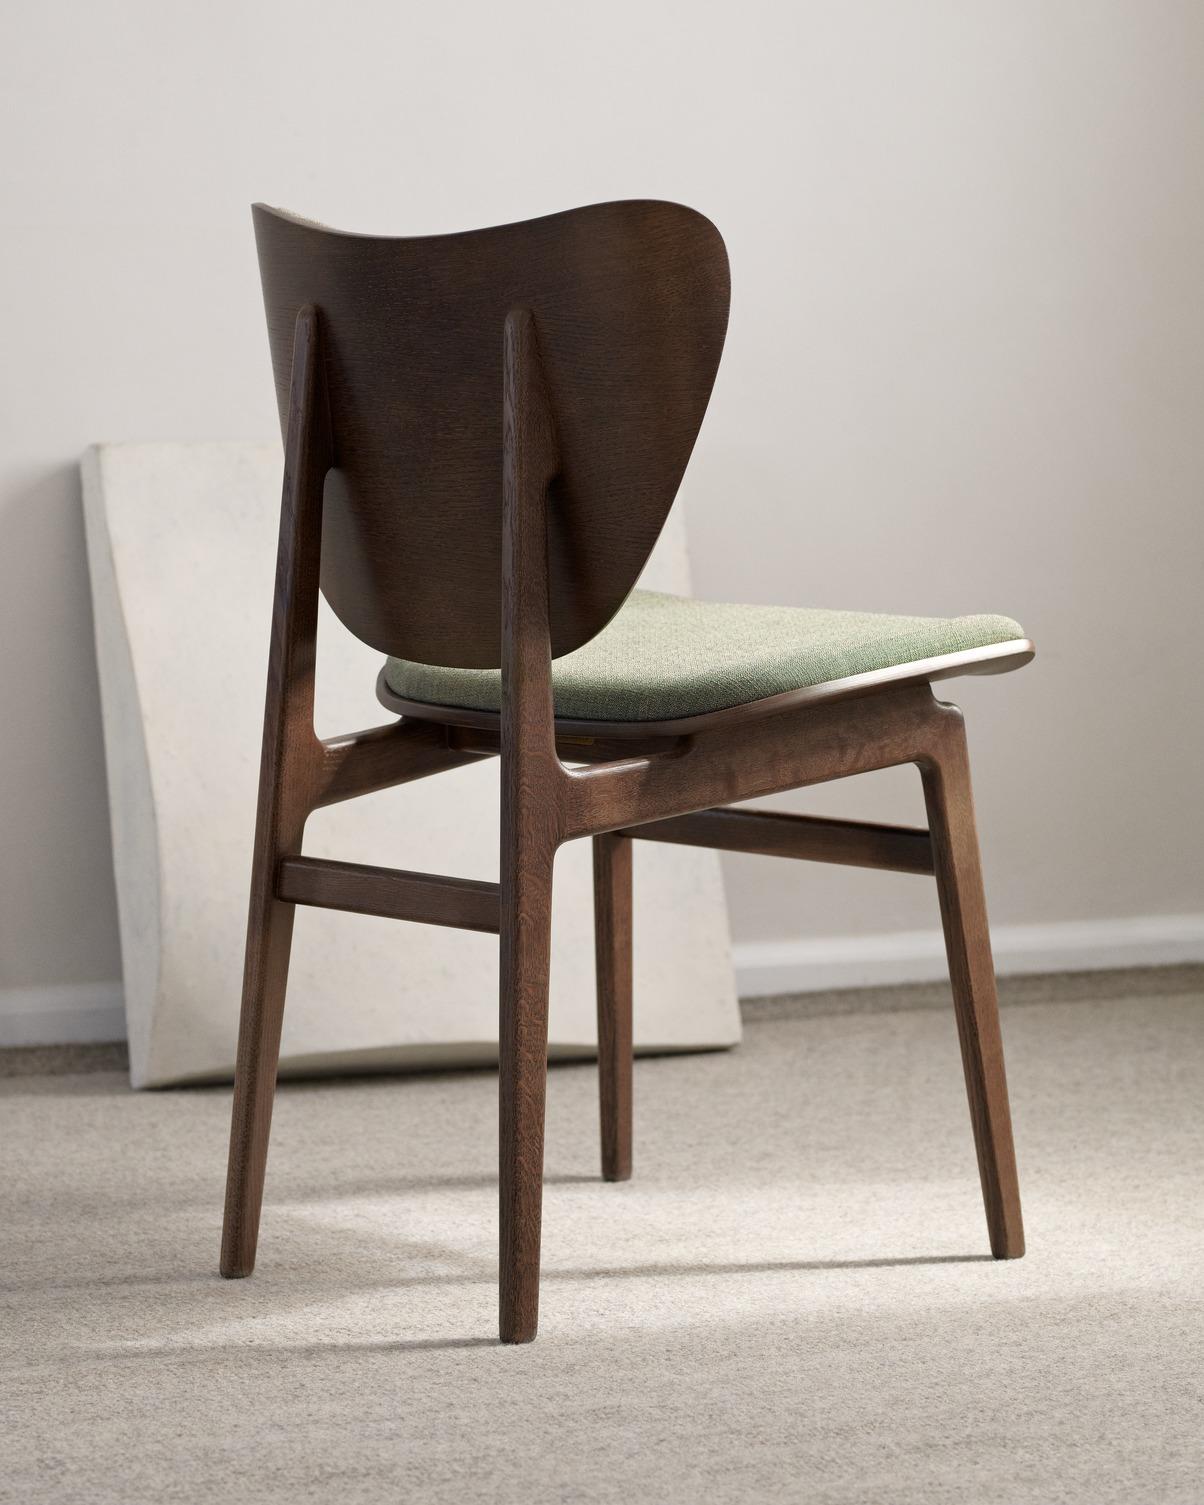 'Elephant' Dining Chair by Norr11, Natural Oak, Leather Mineral In New Condition For Sale In Paris, FR